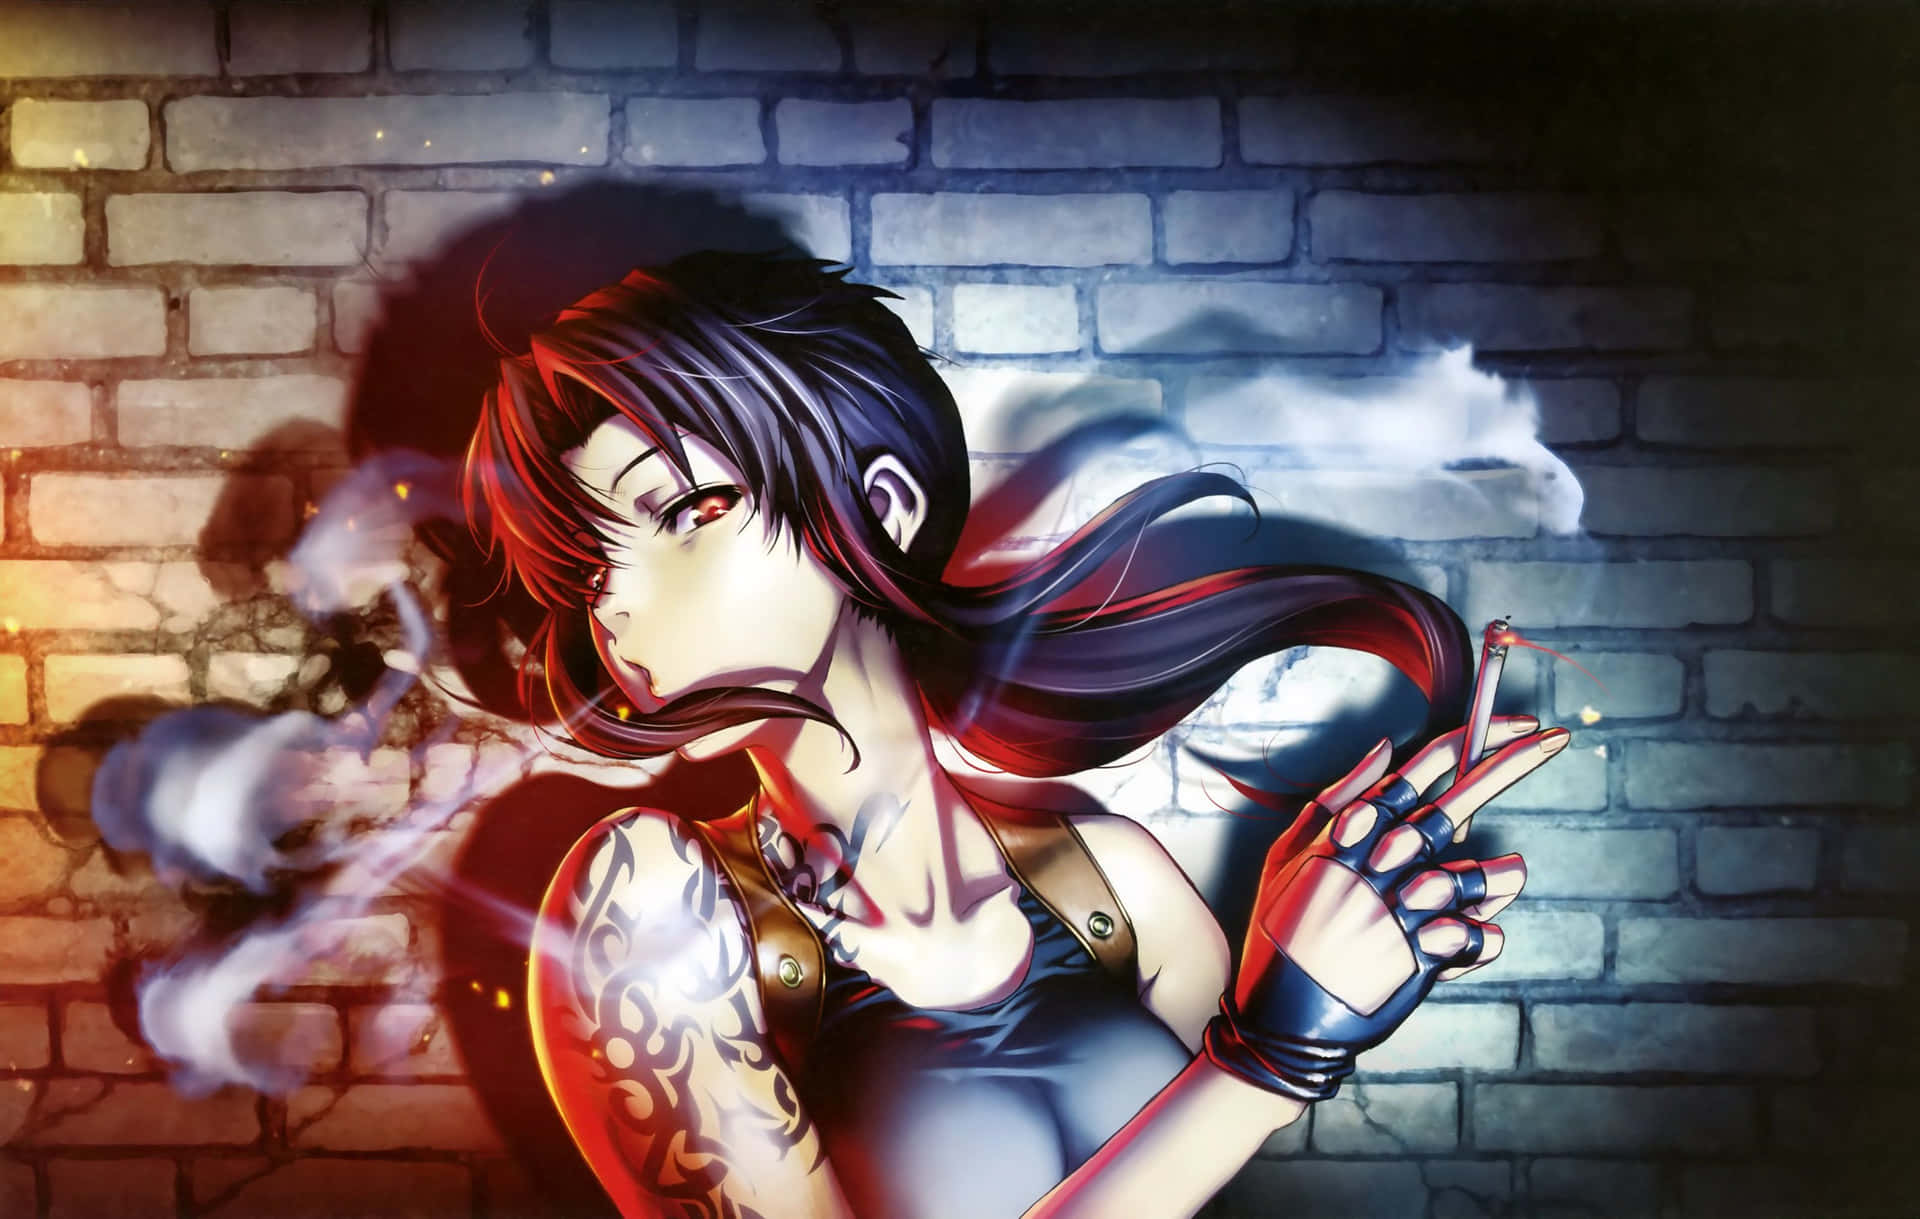 Badass Anime Revy With Cigarette Wallpaper